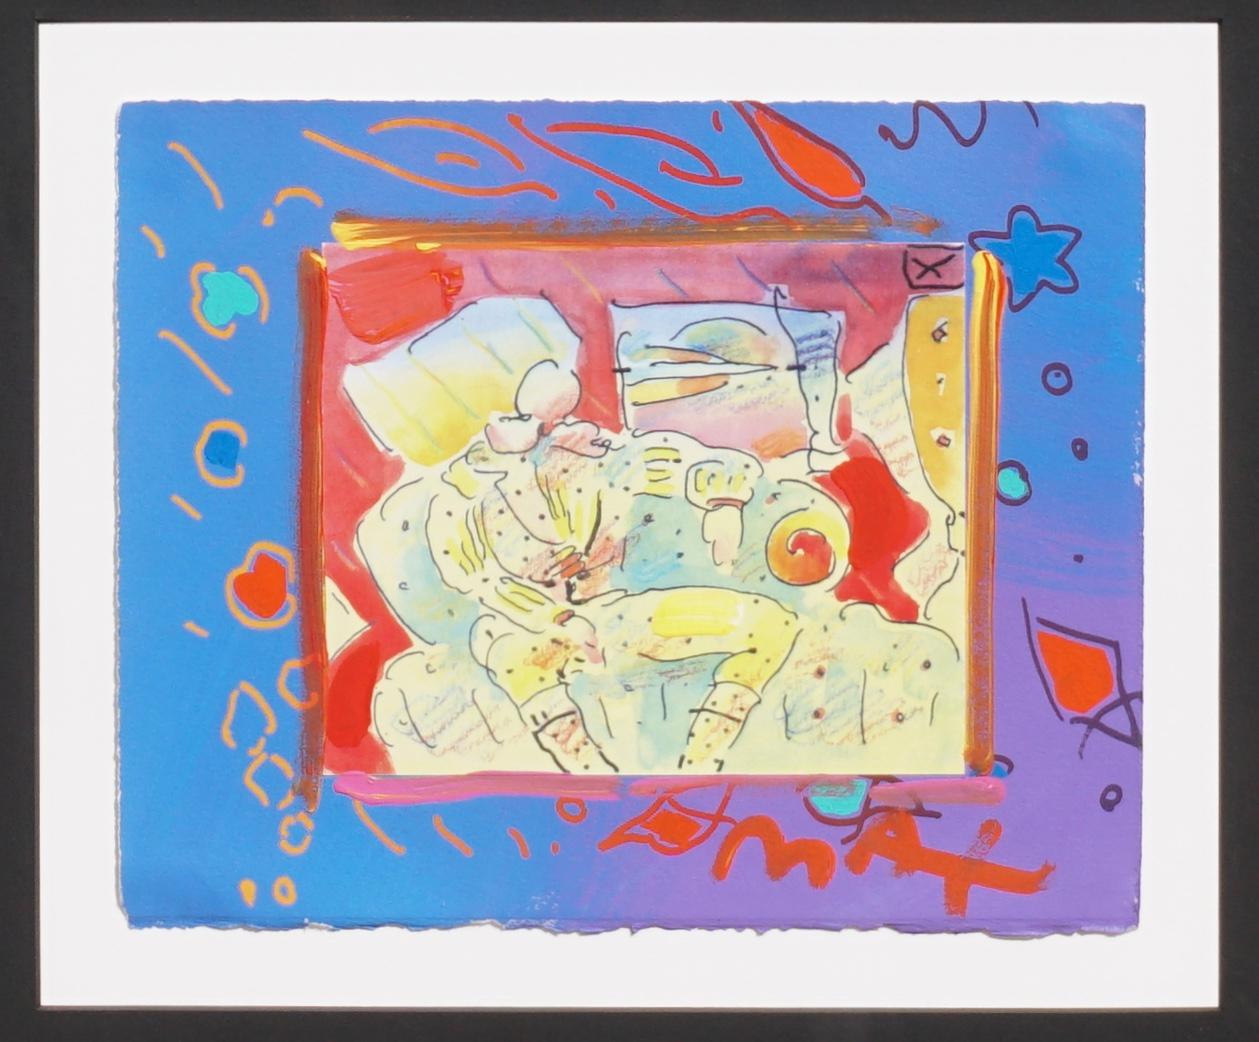 Peter Max (American, b.1937) “gent on sofa” 1996 Overpaint 
signed “Max” (lower right).
A unique variation. Peter Max studio stamp on verso.

Excellent condition

Measures: Artwork: 8.5 x 10.5 inches.
Framed: 19 x 21 inches.

AVANTIQUES is dedicated